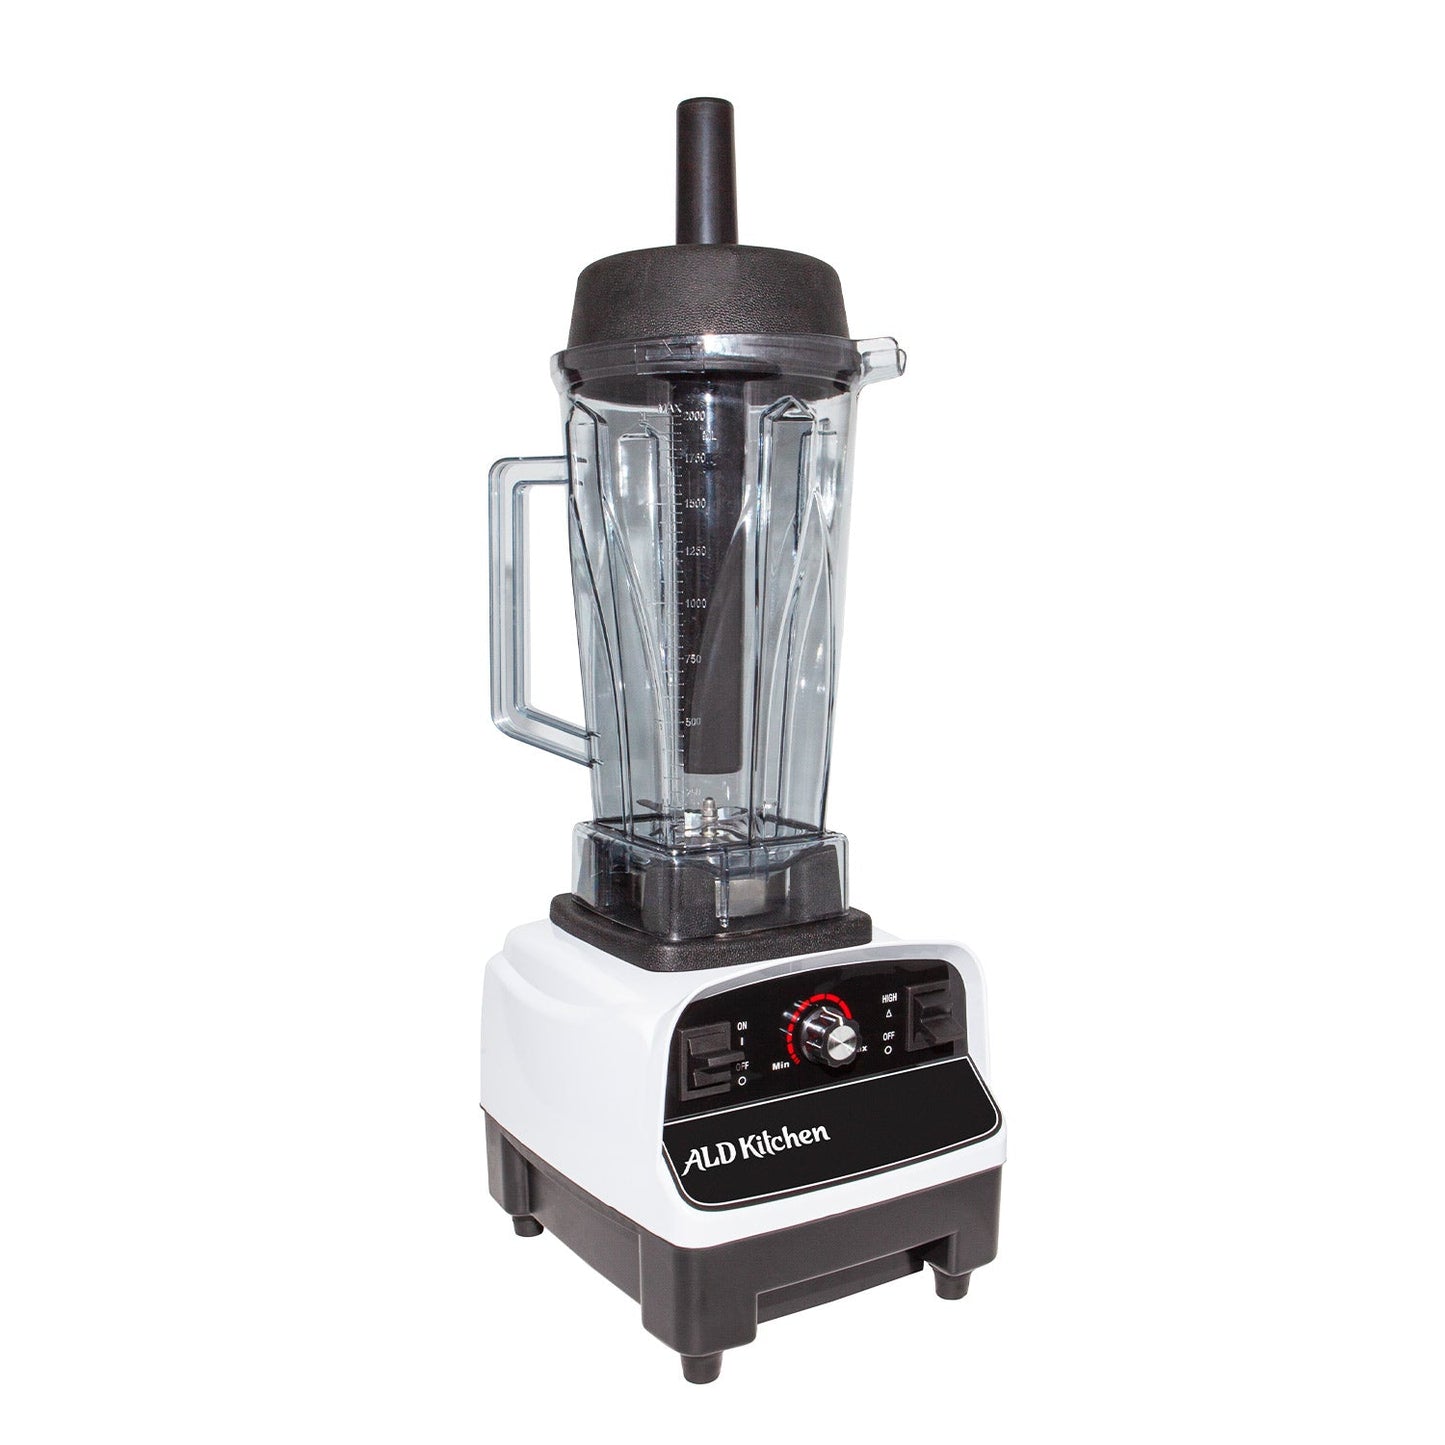 A-BL767A Commercial Blender | 2L | Blender for Smoothies & Cocktails | Stainless Steel Blade - Almondscove